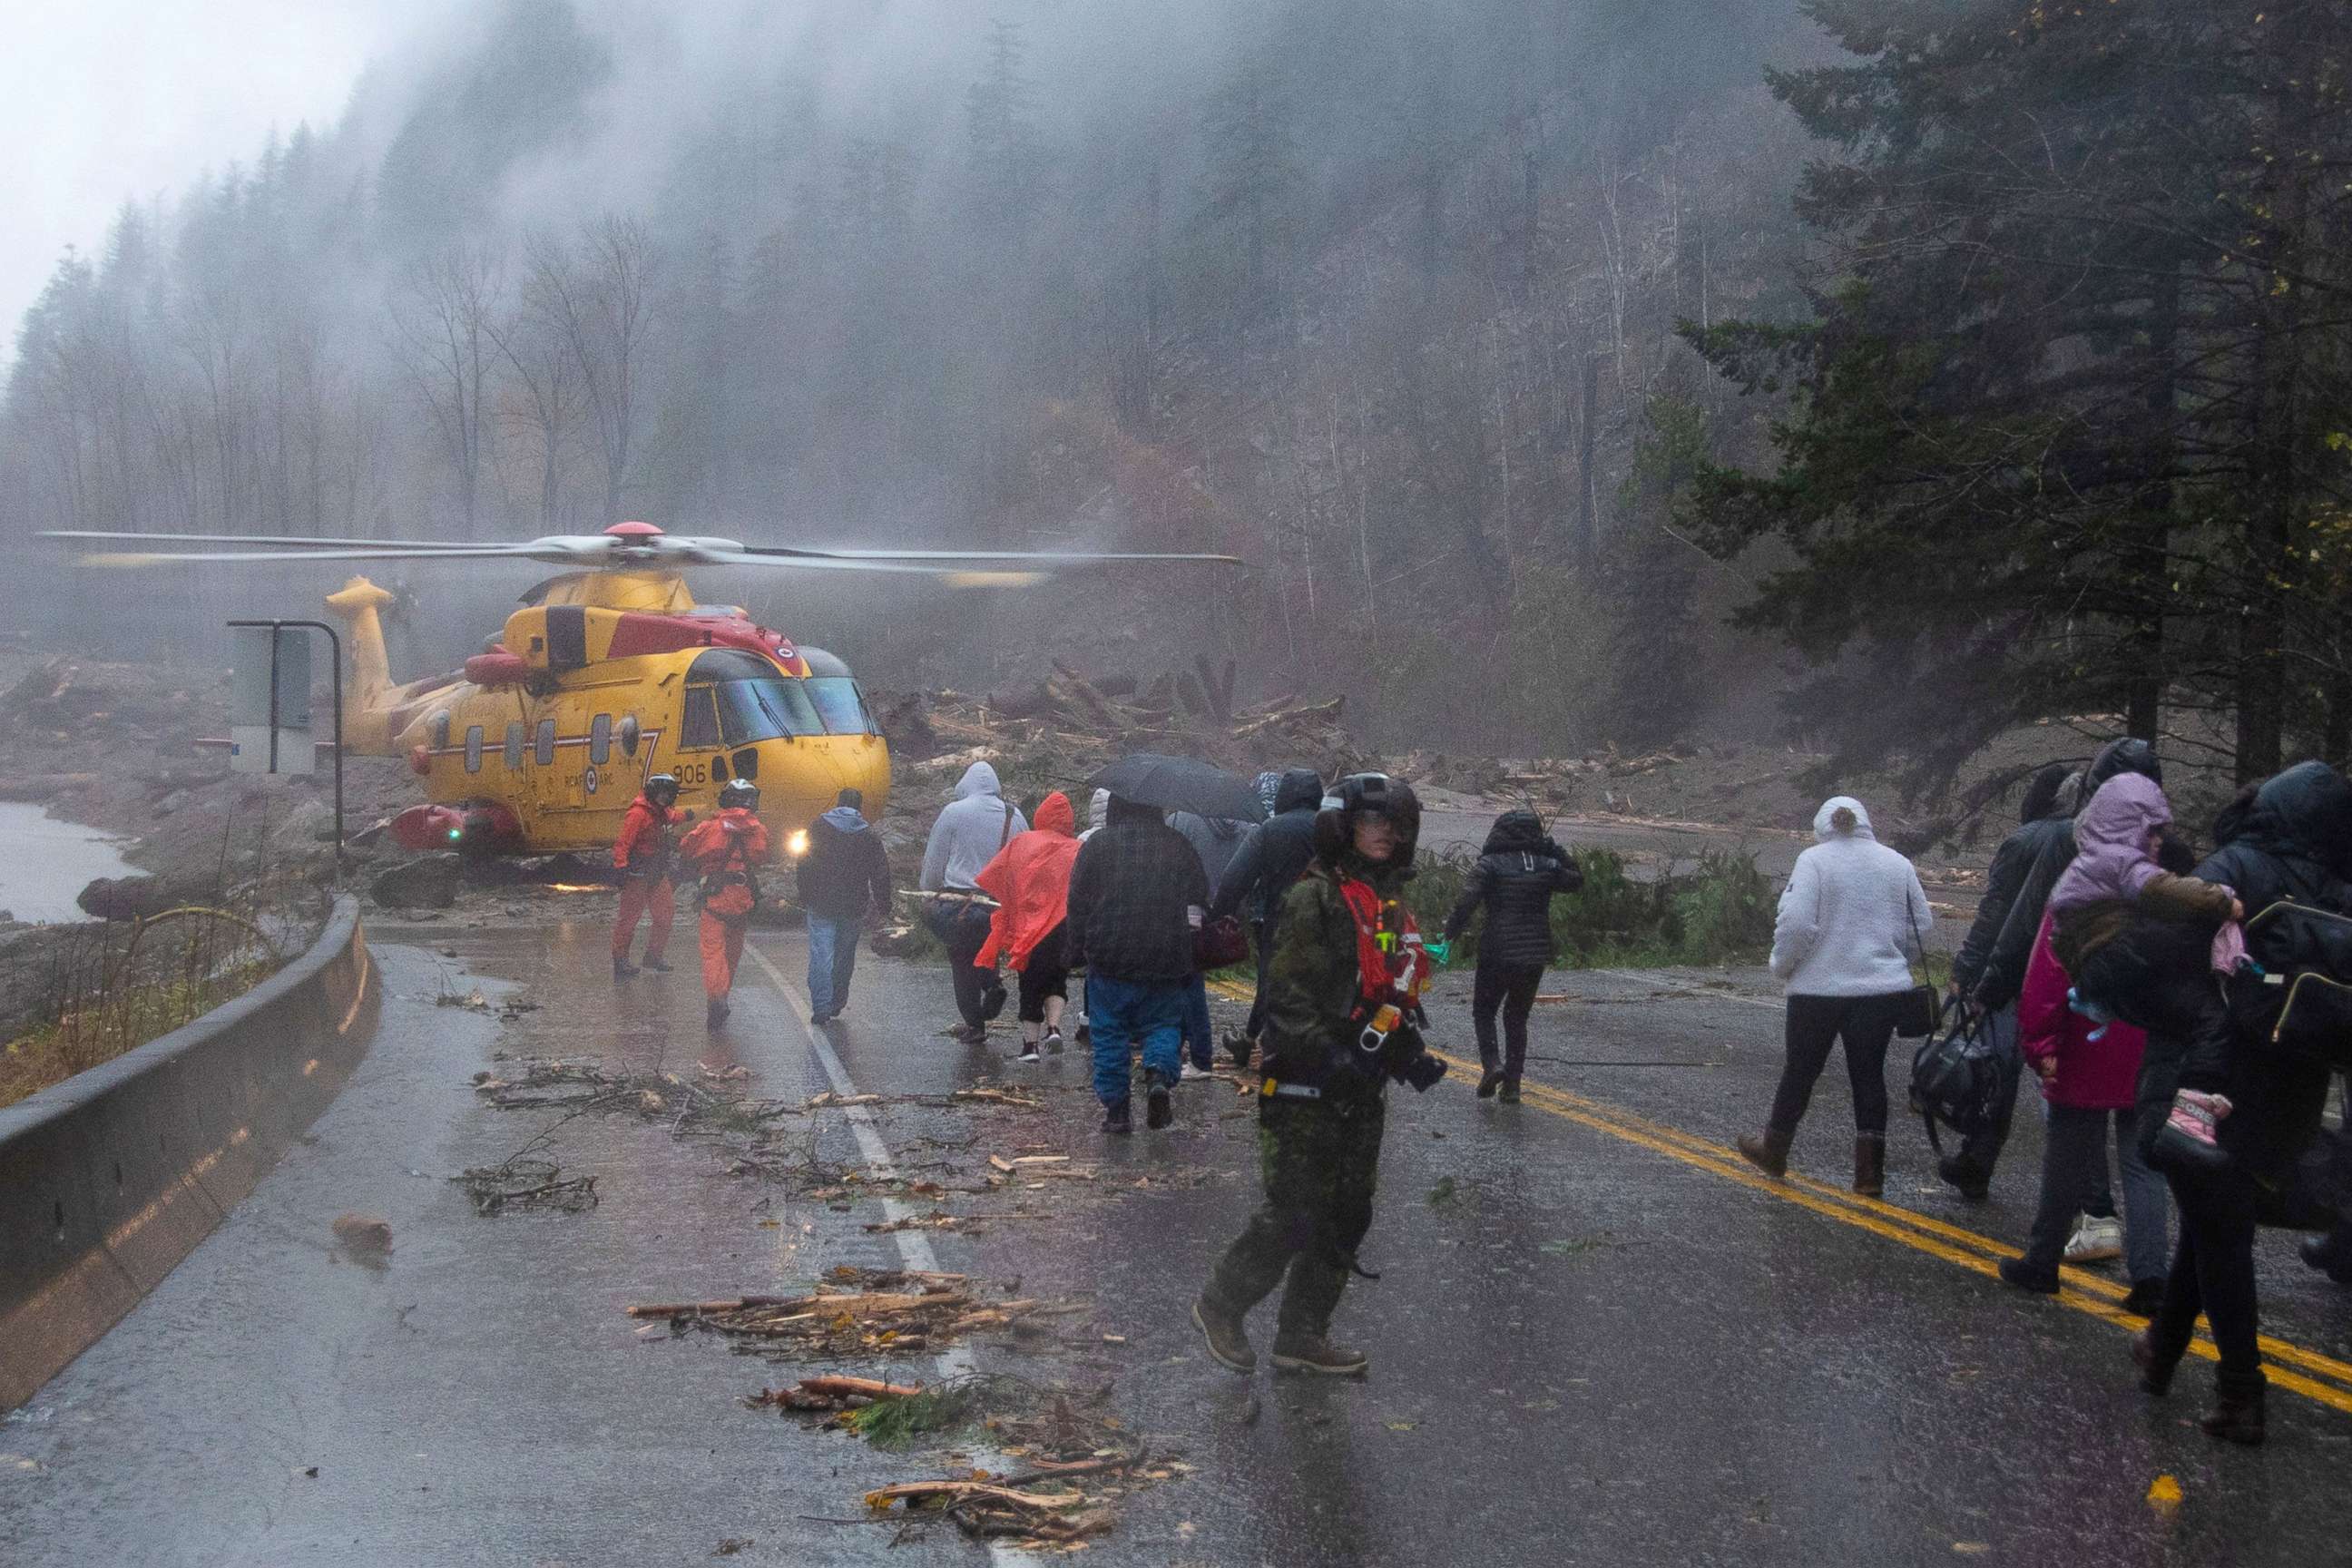 PHOTO: Crew members from Royal Canadian Air Force 442 Squadron lead some of over 300 motorists stranded by mudslides towards a CH-149 Cormorant helicopter for their evacuation, in Agassiz, British Columbia, Canada, Nov. 15, 2021. 